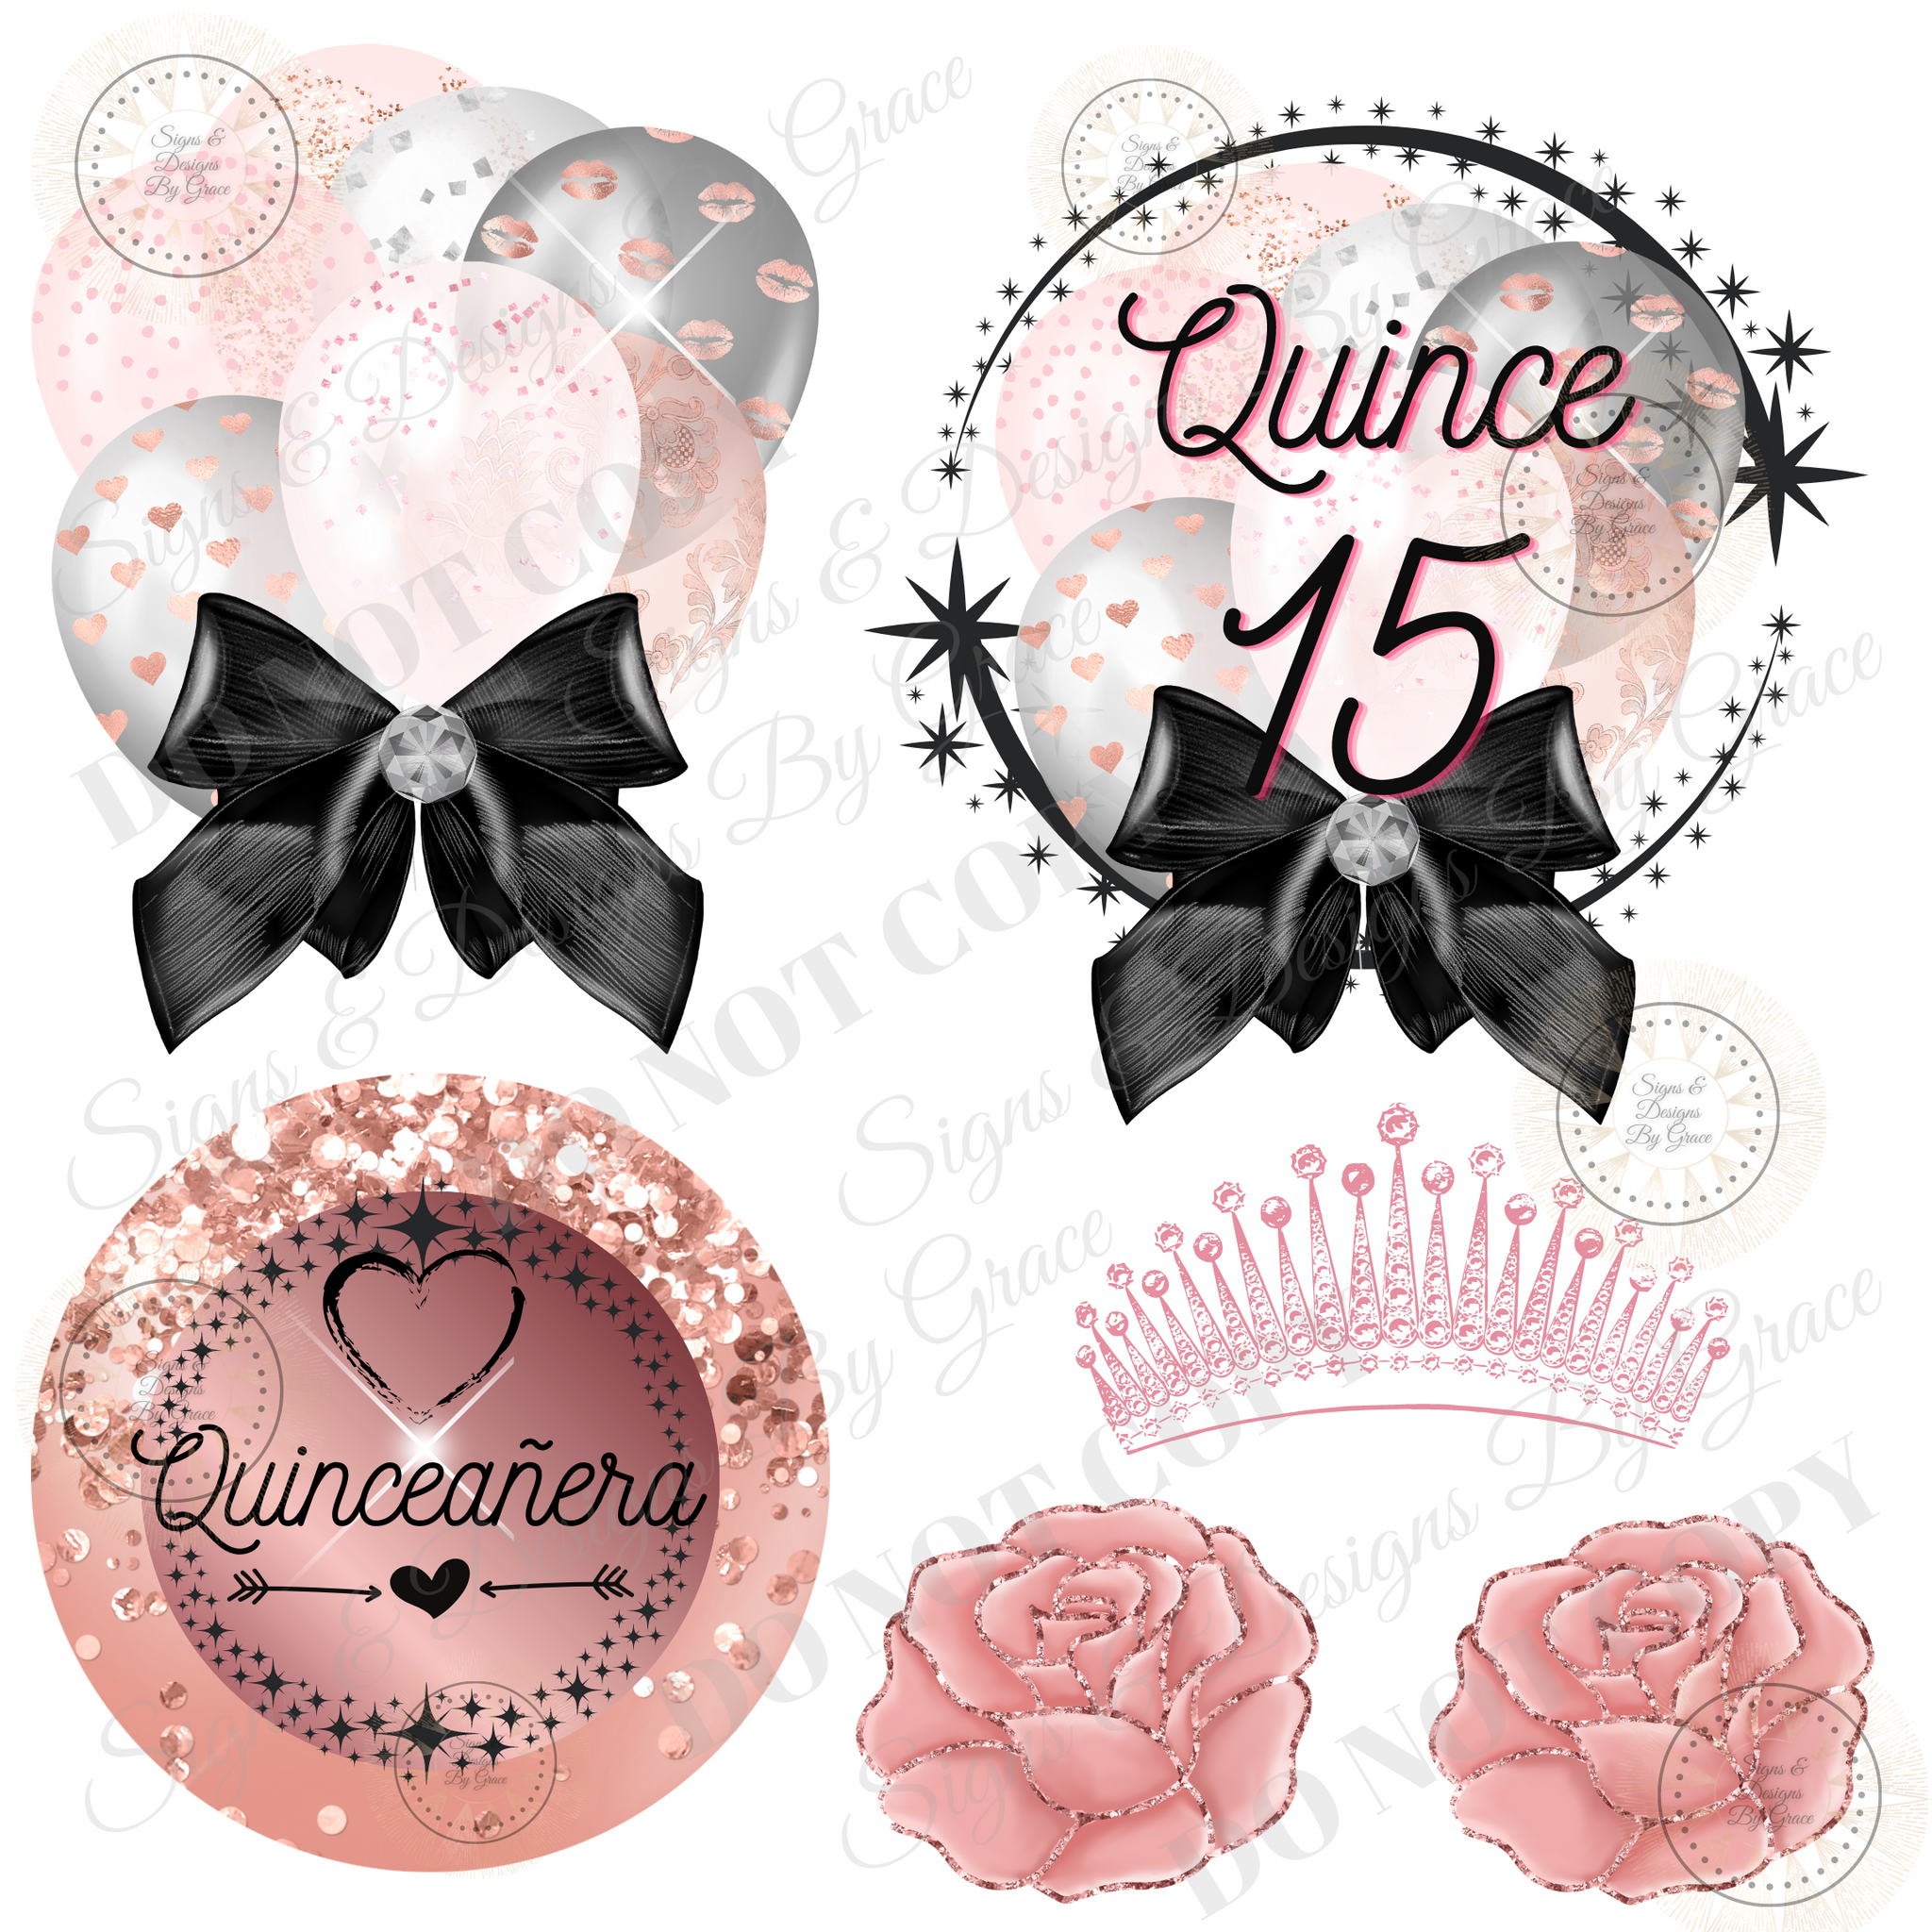 QUINCE 905